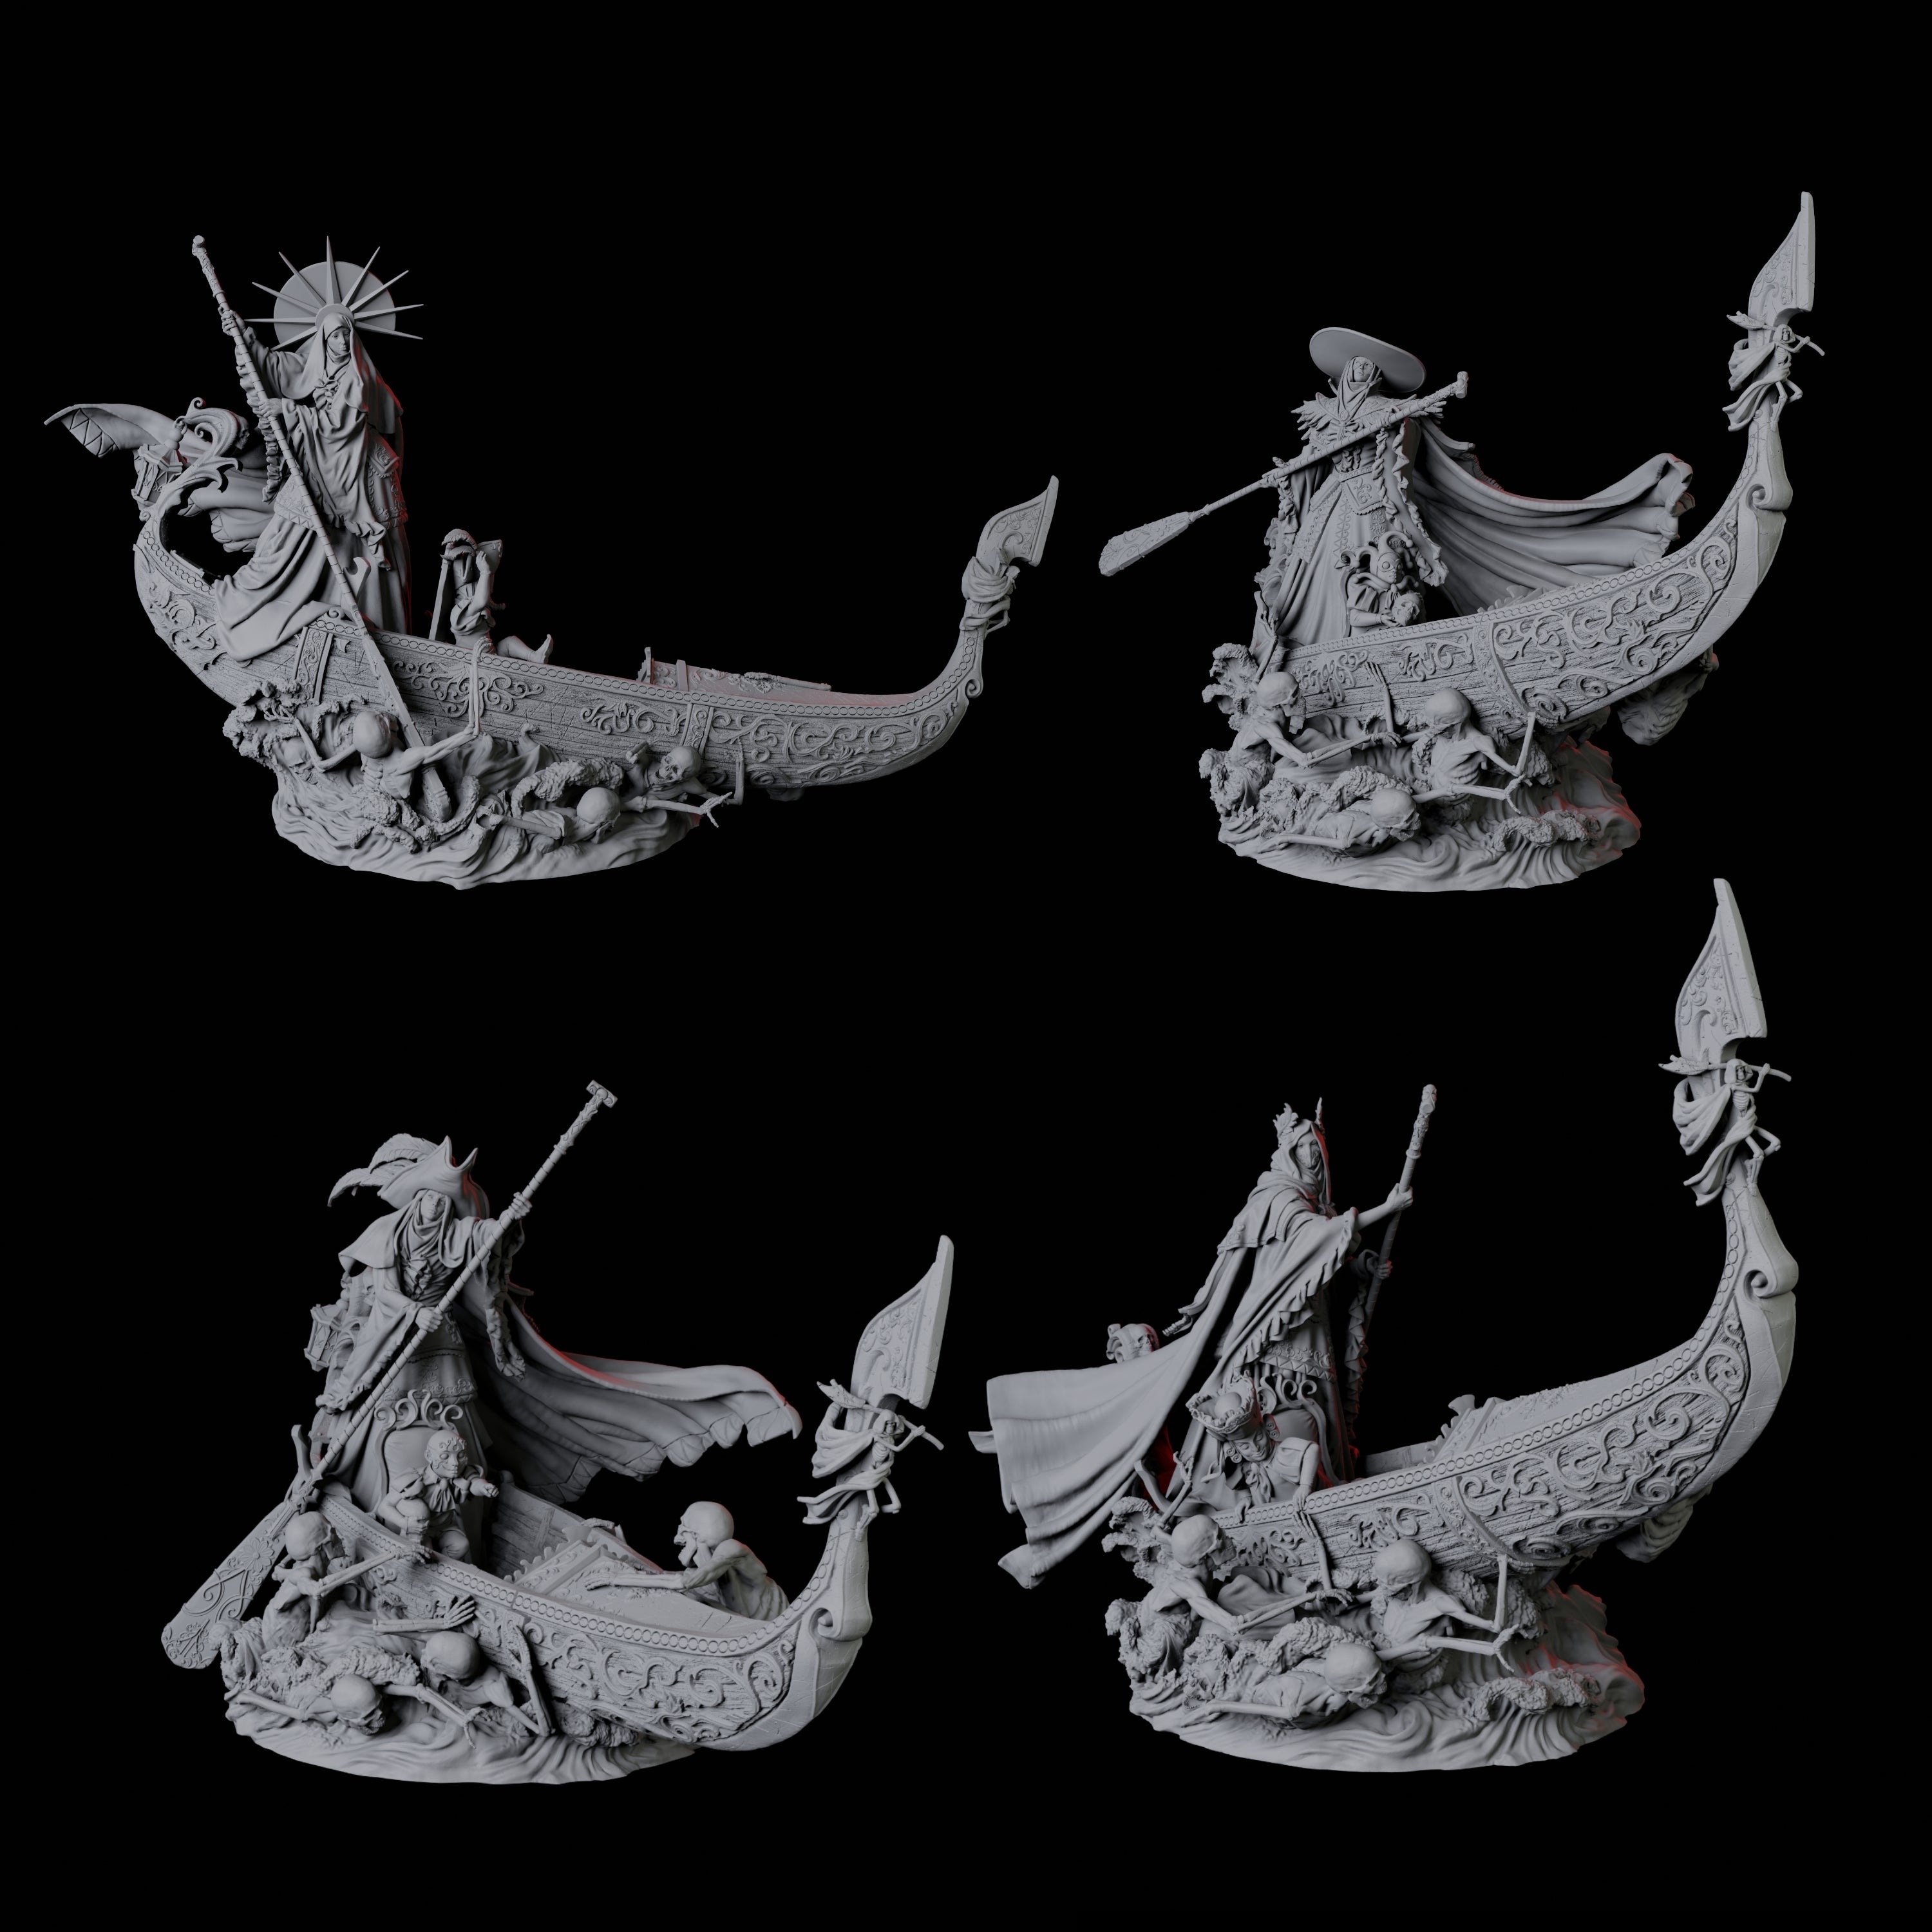 Four Punting Gondoliers of the River Styx Miniature for Dungeons and Dragons, Pathfinder or other TTRPGs